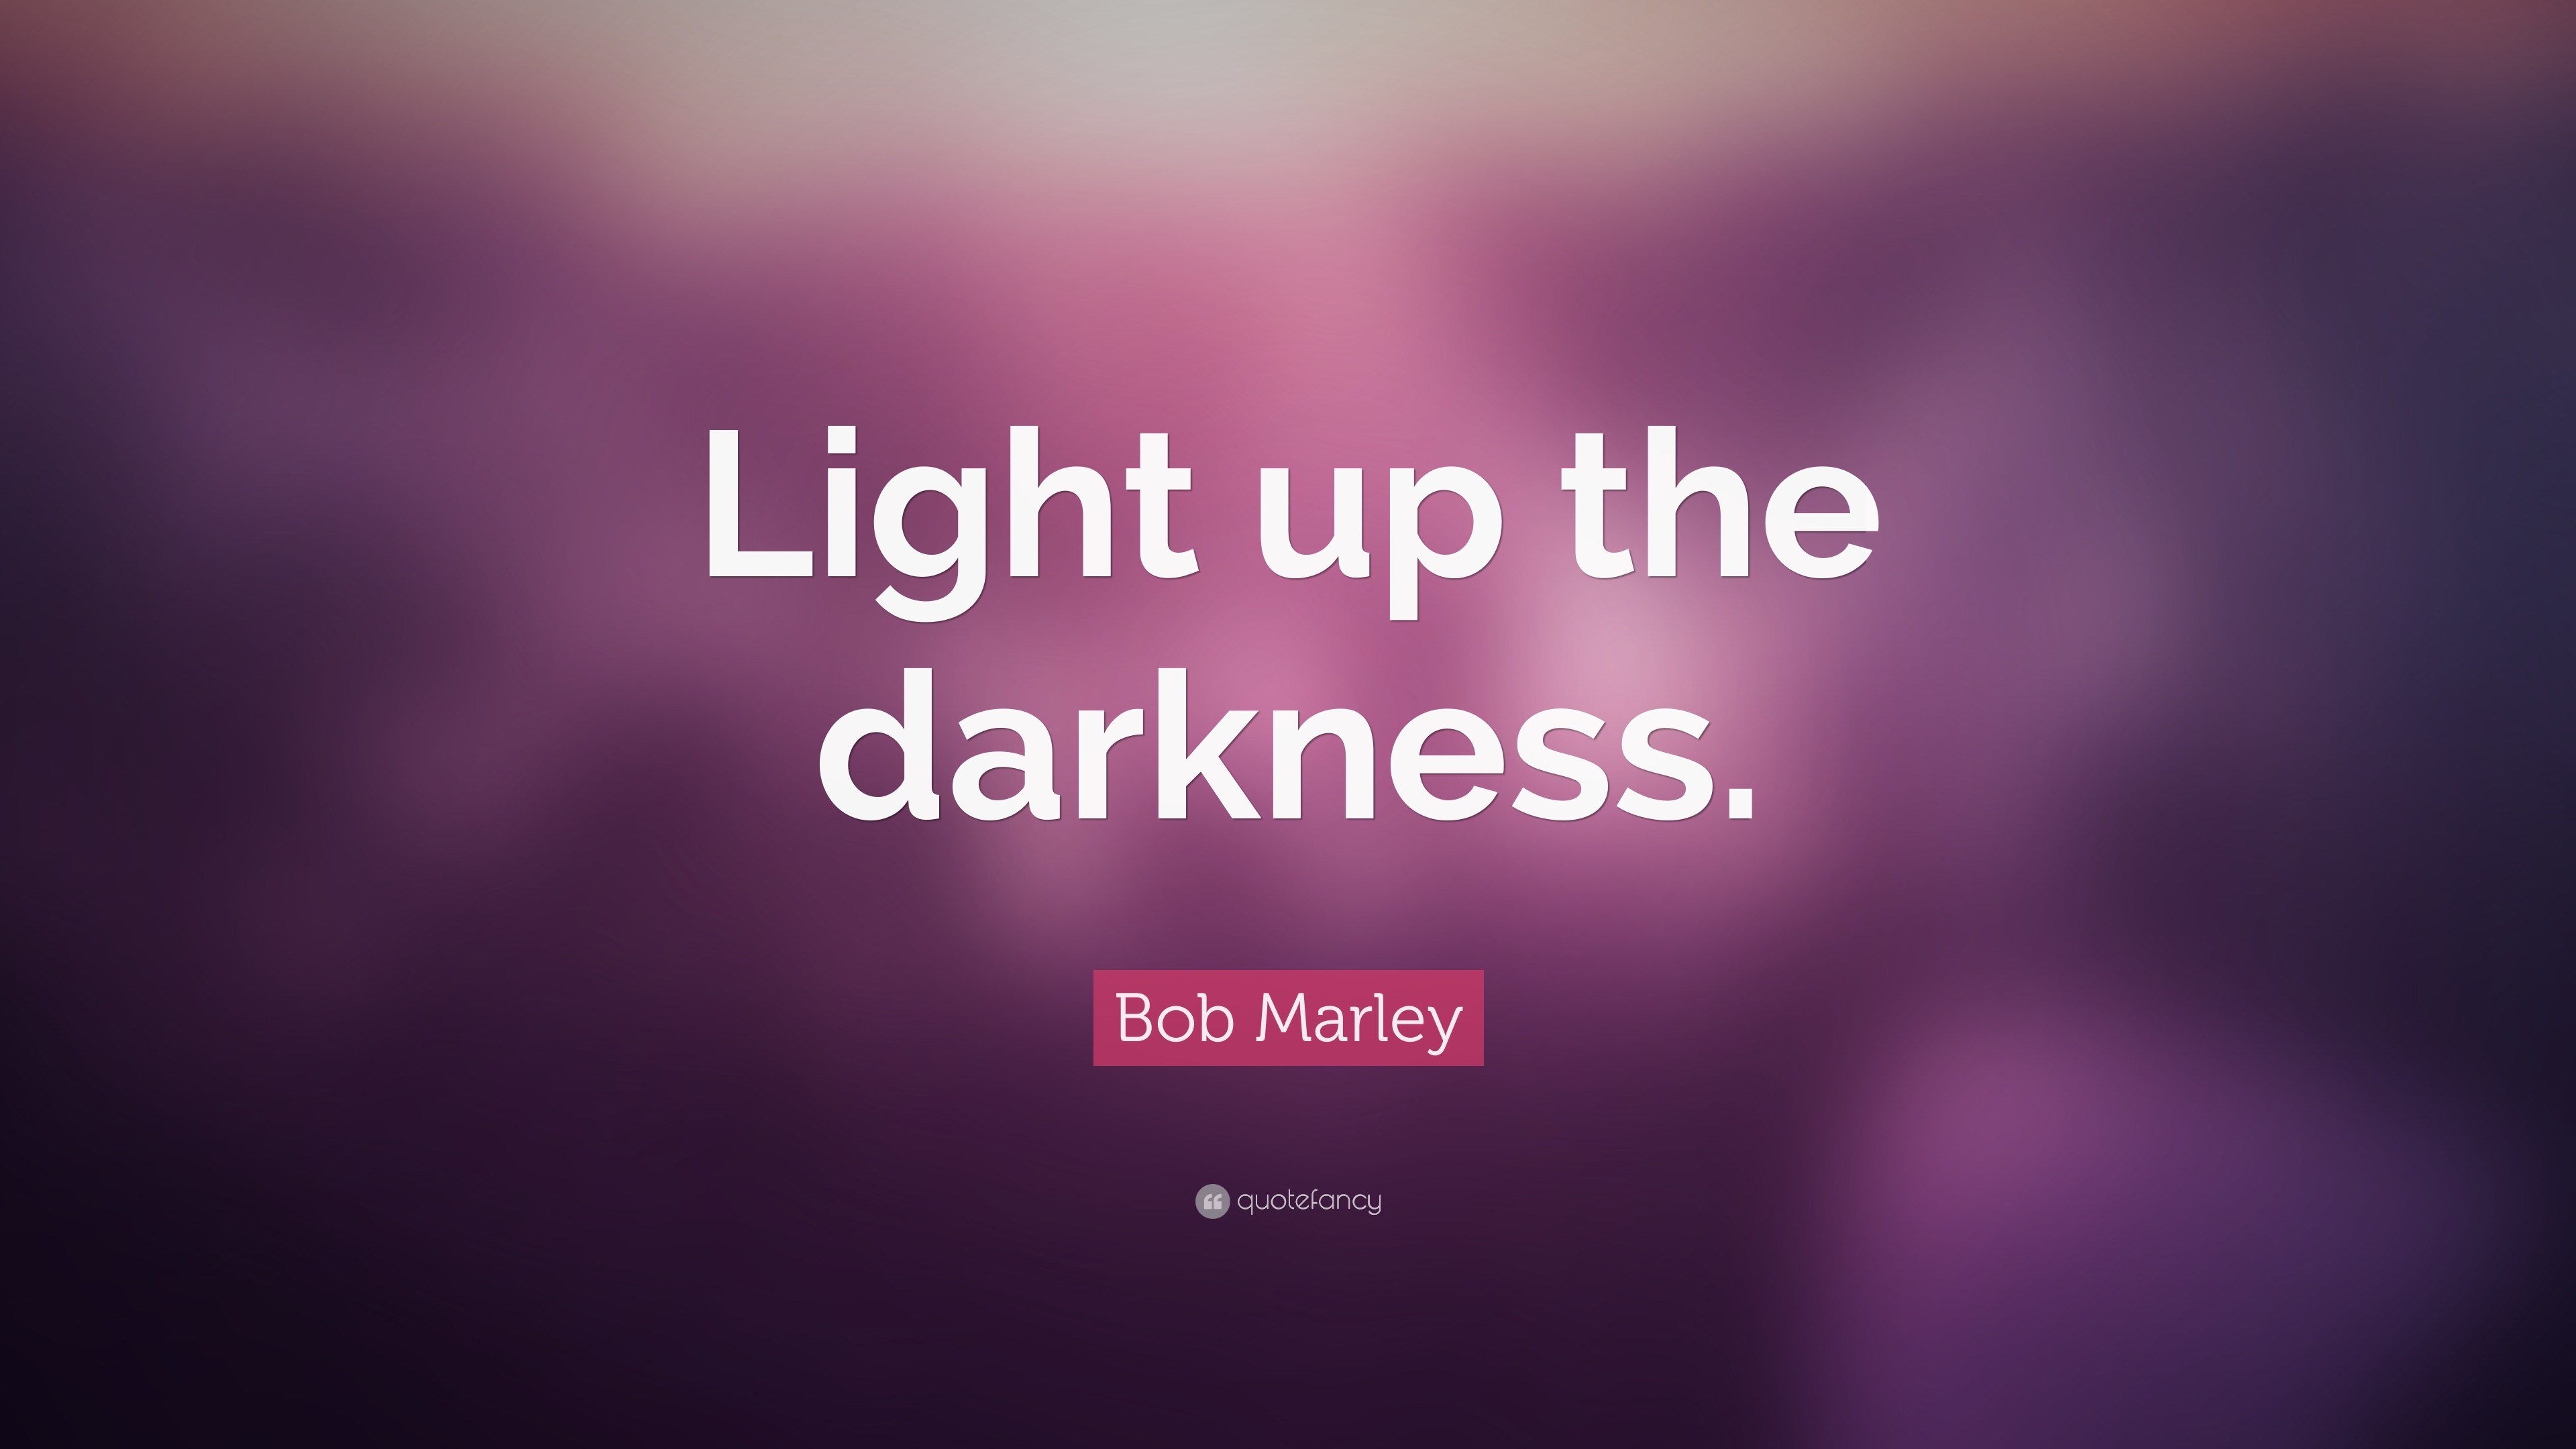 3840x2160 Bob Marley Quote: “Light up the darkness.”